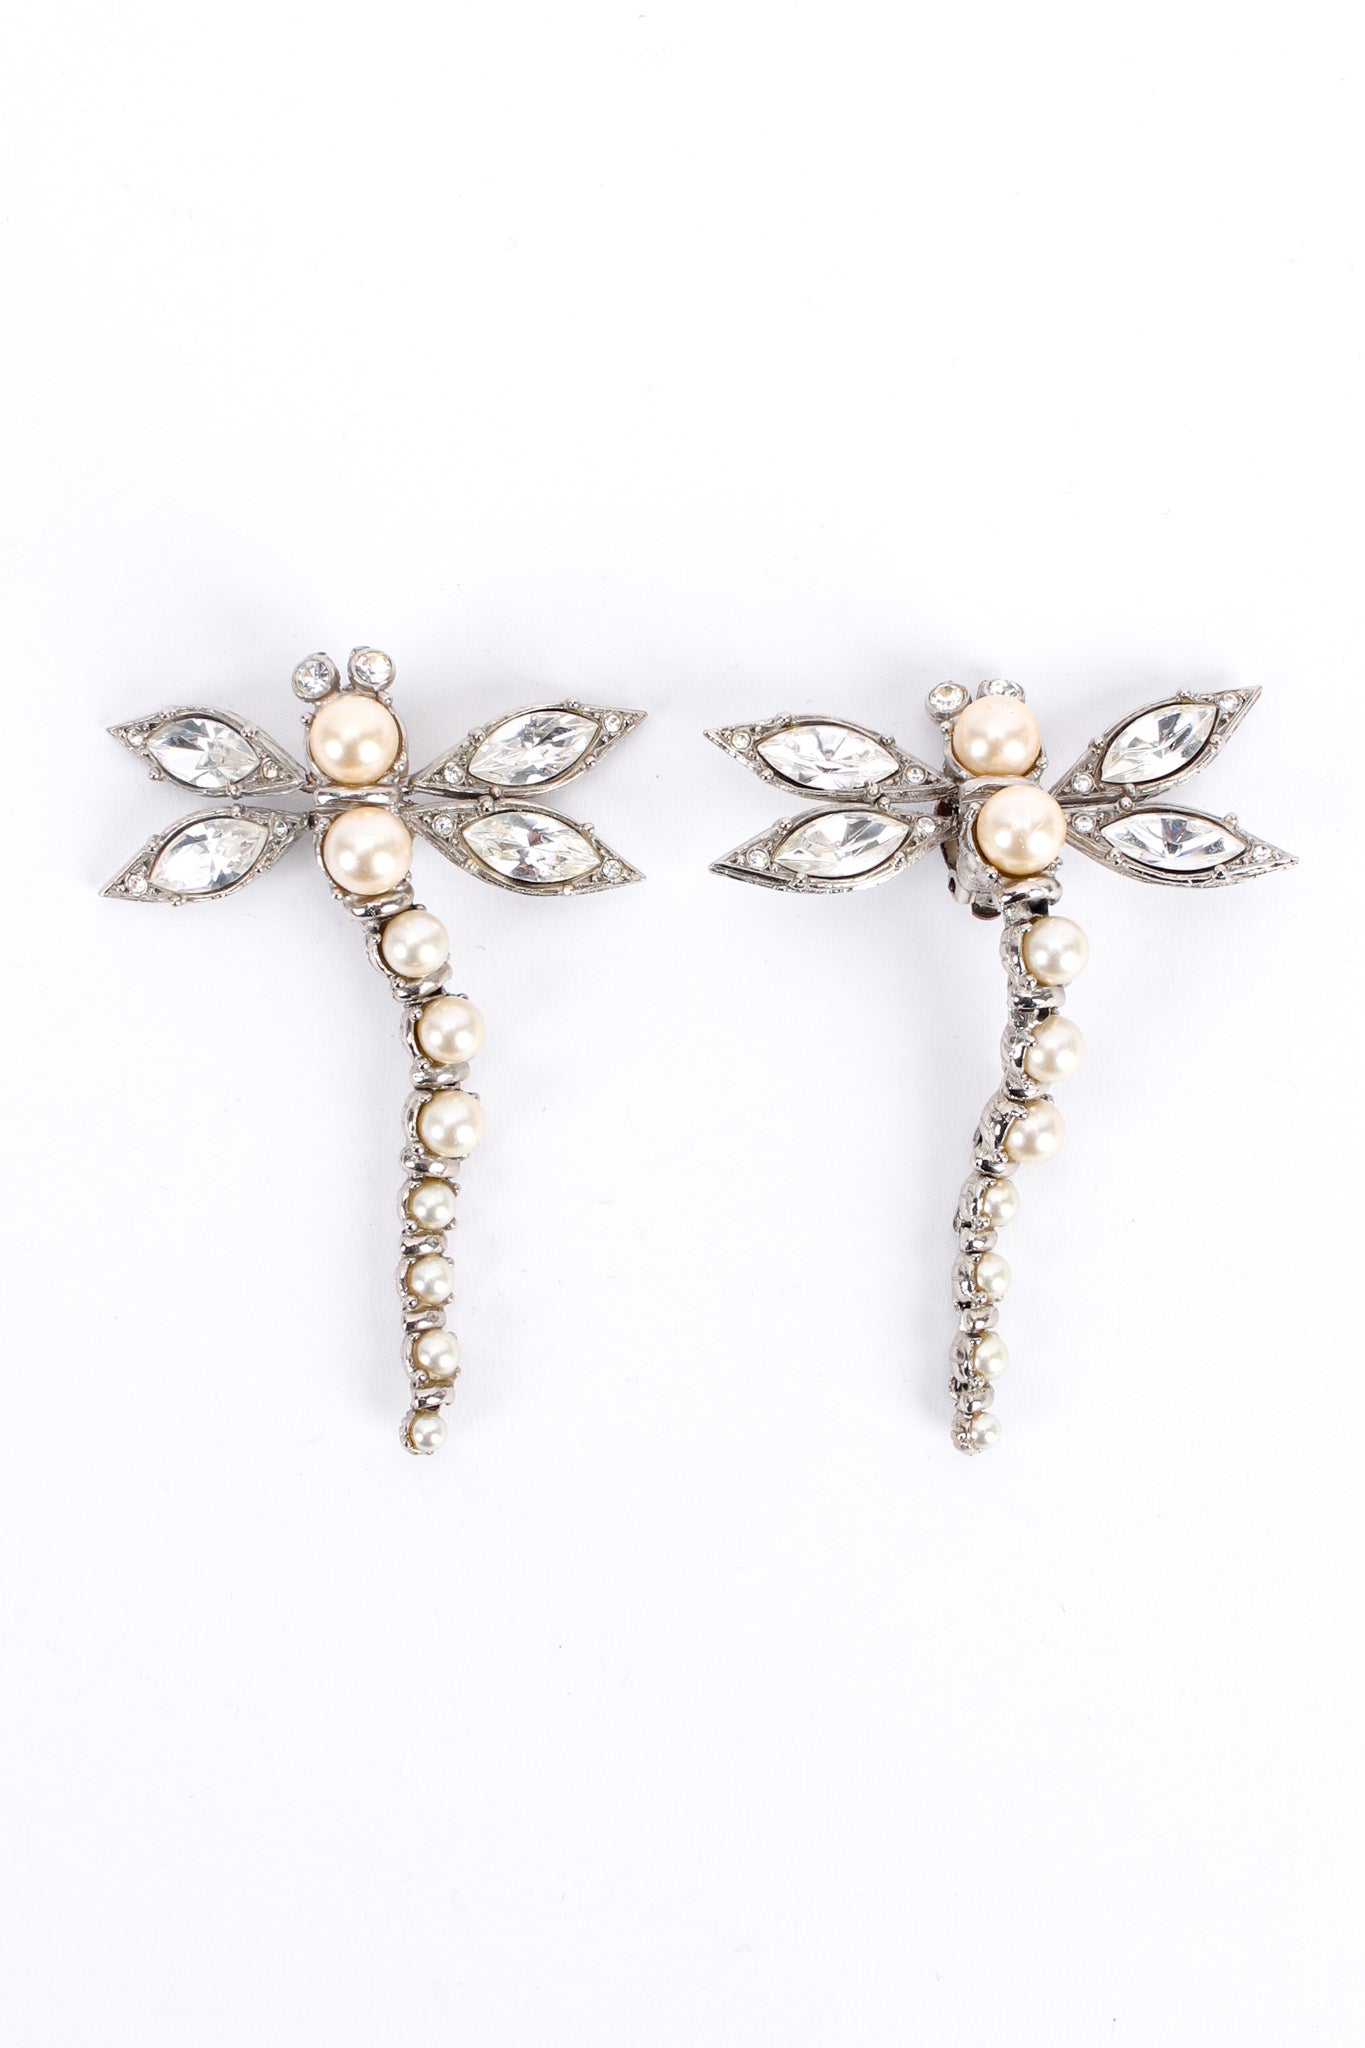 Vintage Christian Dior Crystal Pearl Dragonfly Earrings front flat @ Recess LA